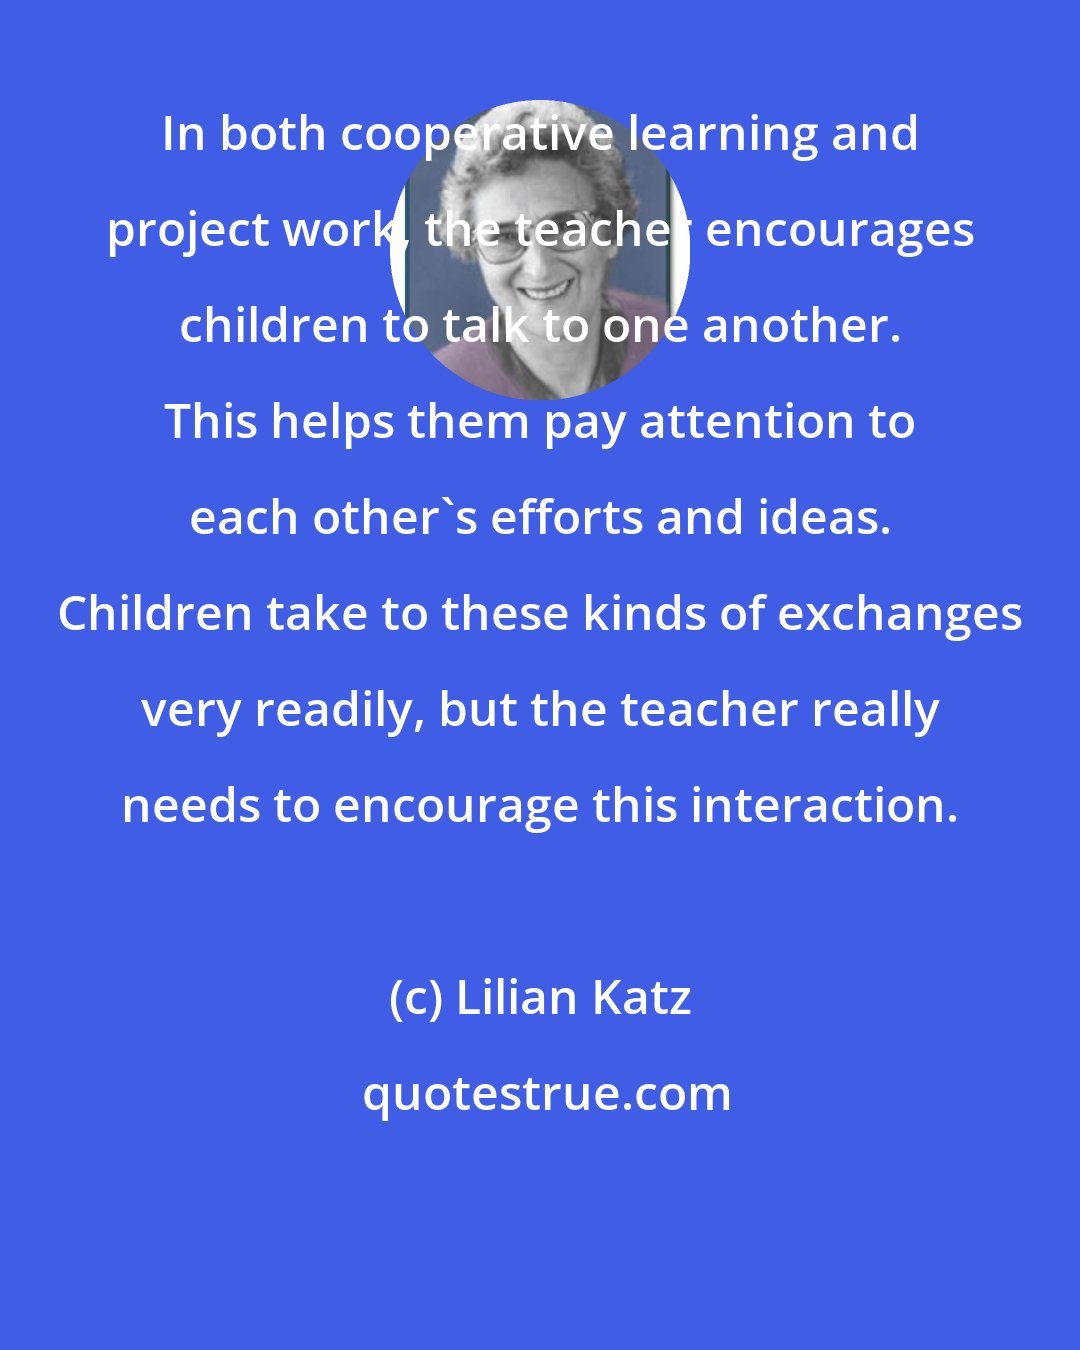 Lilian Katz: In both cooperative learning and project work, the teacher encourages children to talk to one another. This helps them pay attention to each other's efforts and ideas. Children take to these kinds of exchanges very readily, but the teacher really needs to encourage this interaction.